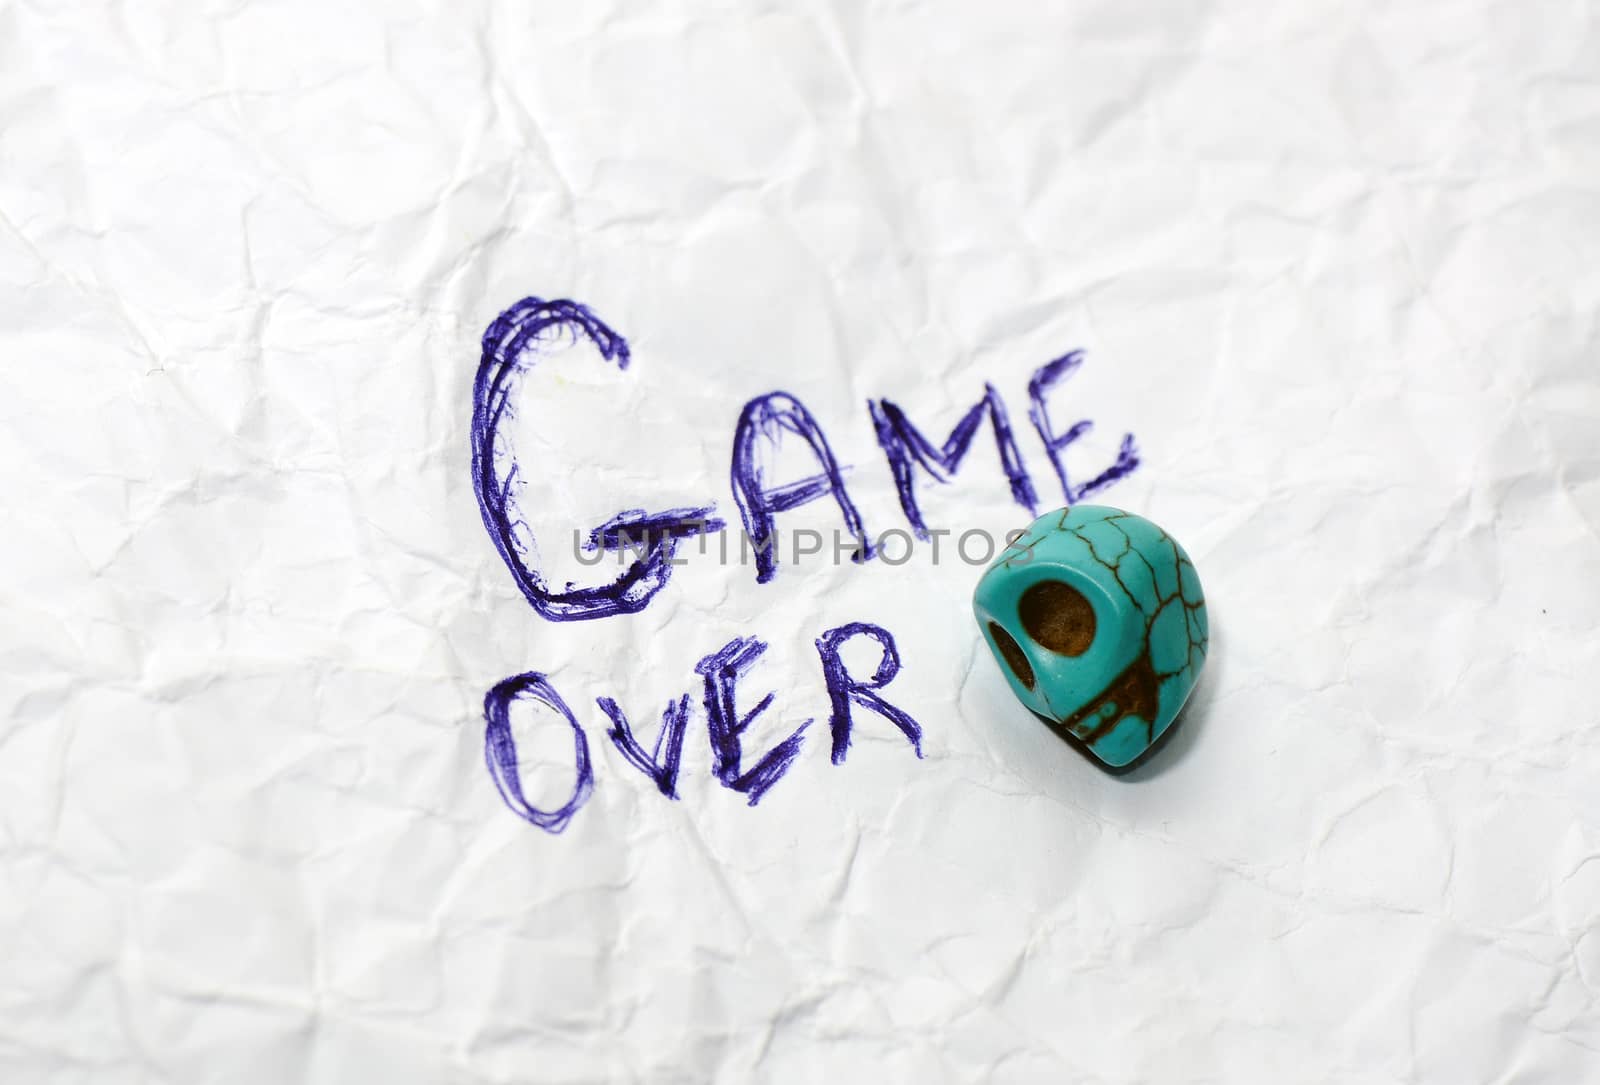 Game over by ivosar